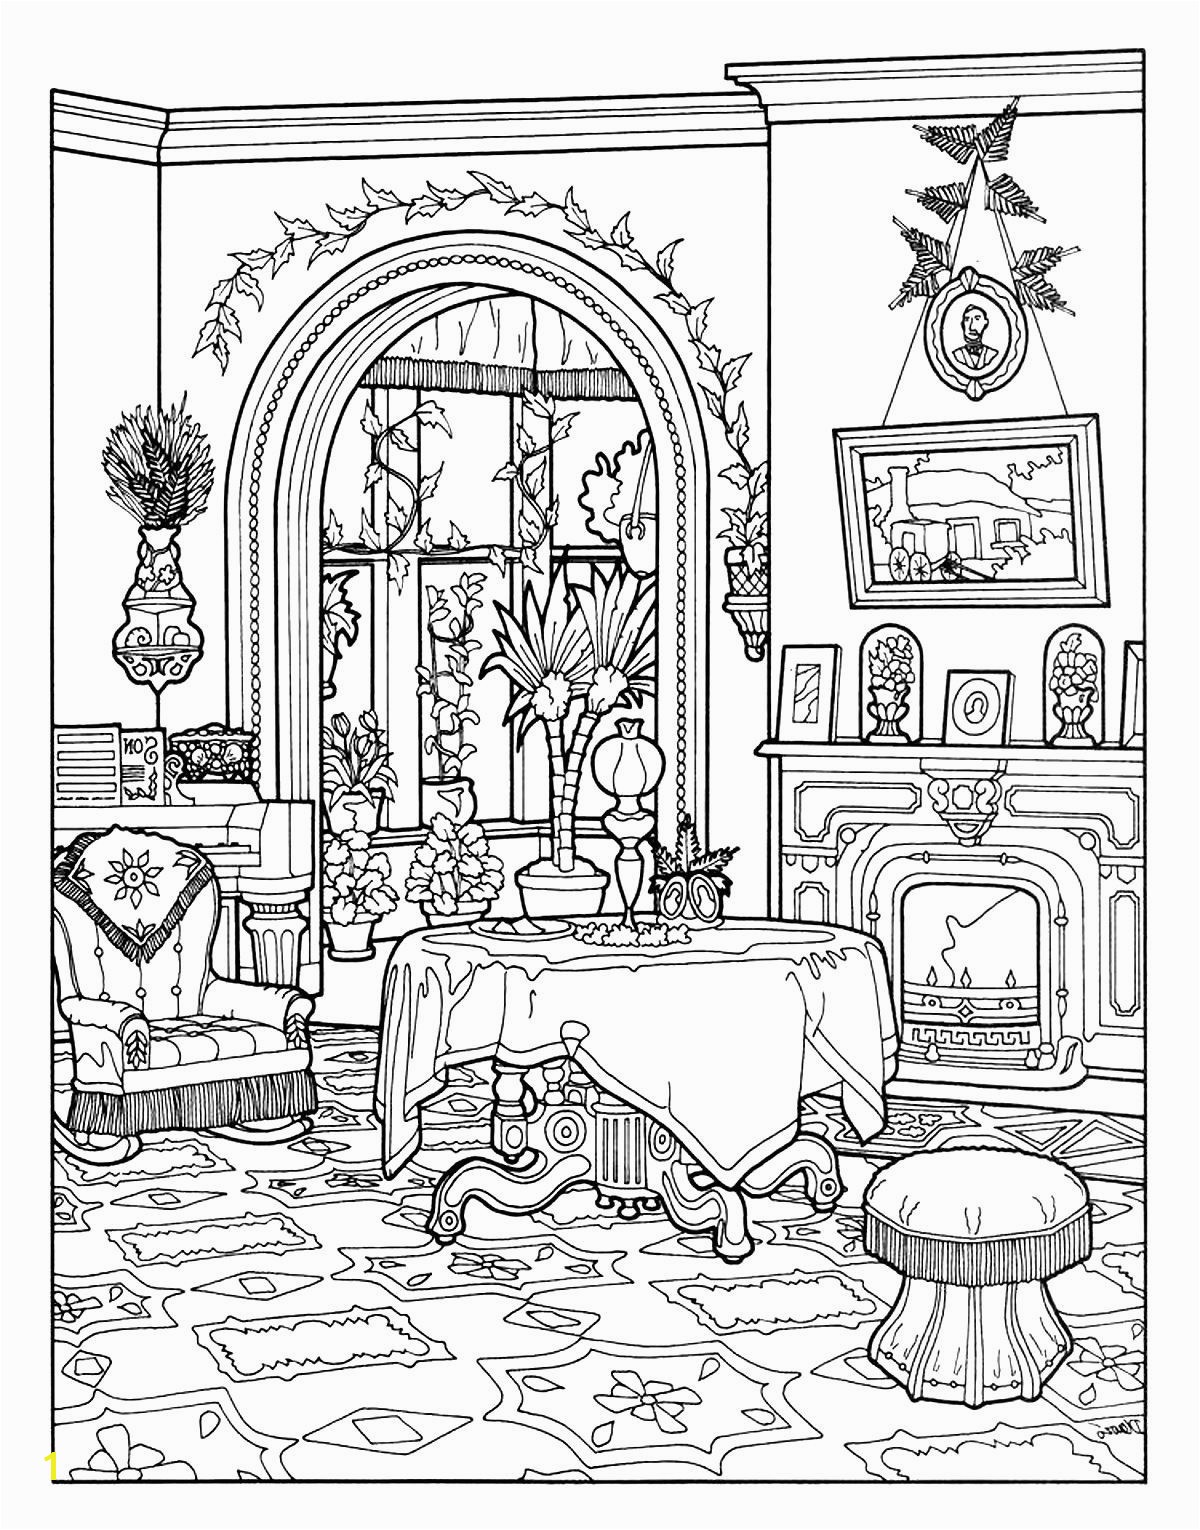 Paris Coloring Pages for Adults 100 Free Coloring Pages for Adults and Children